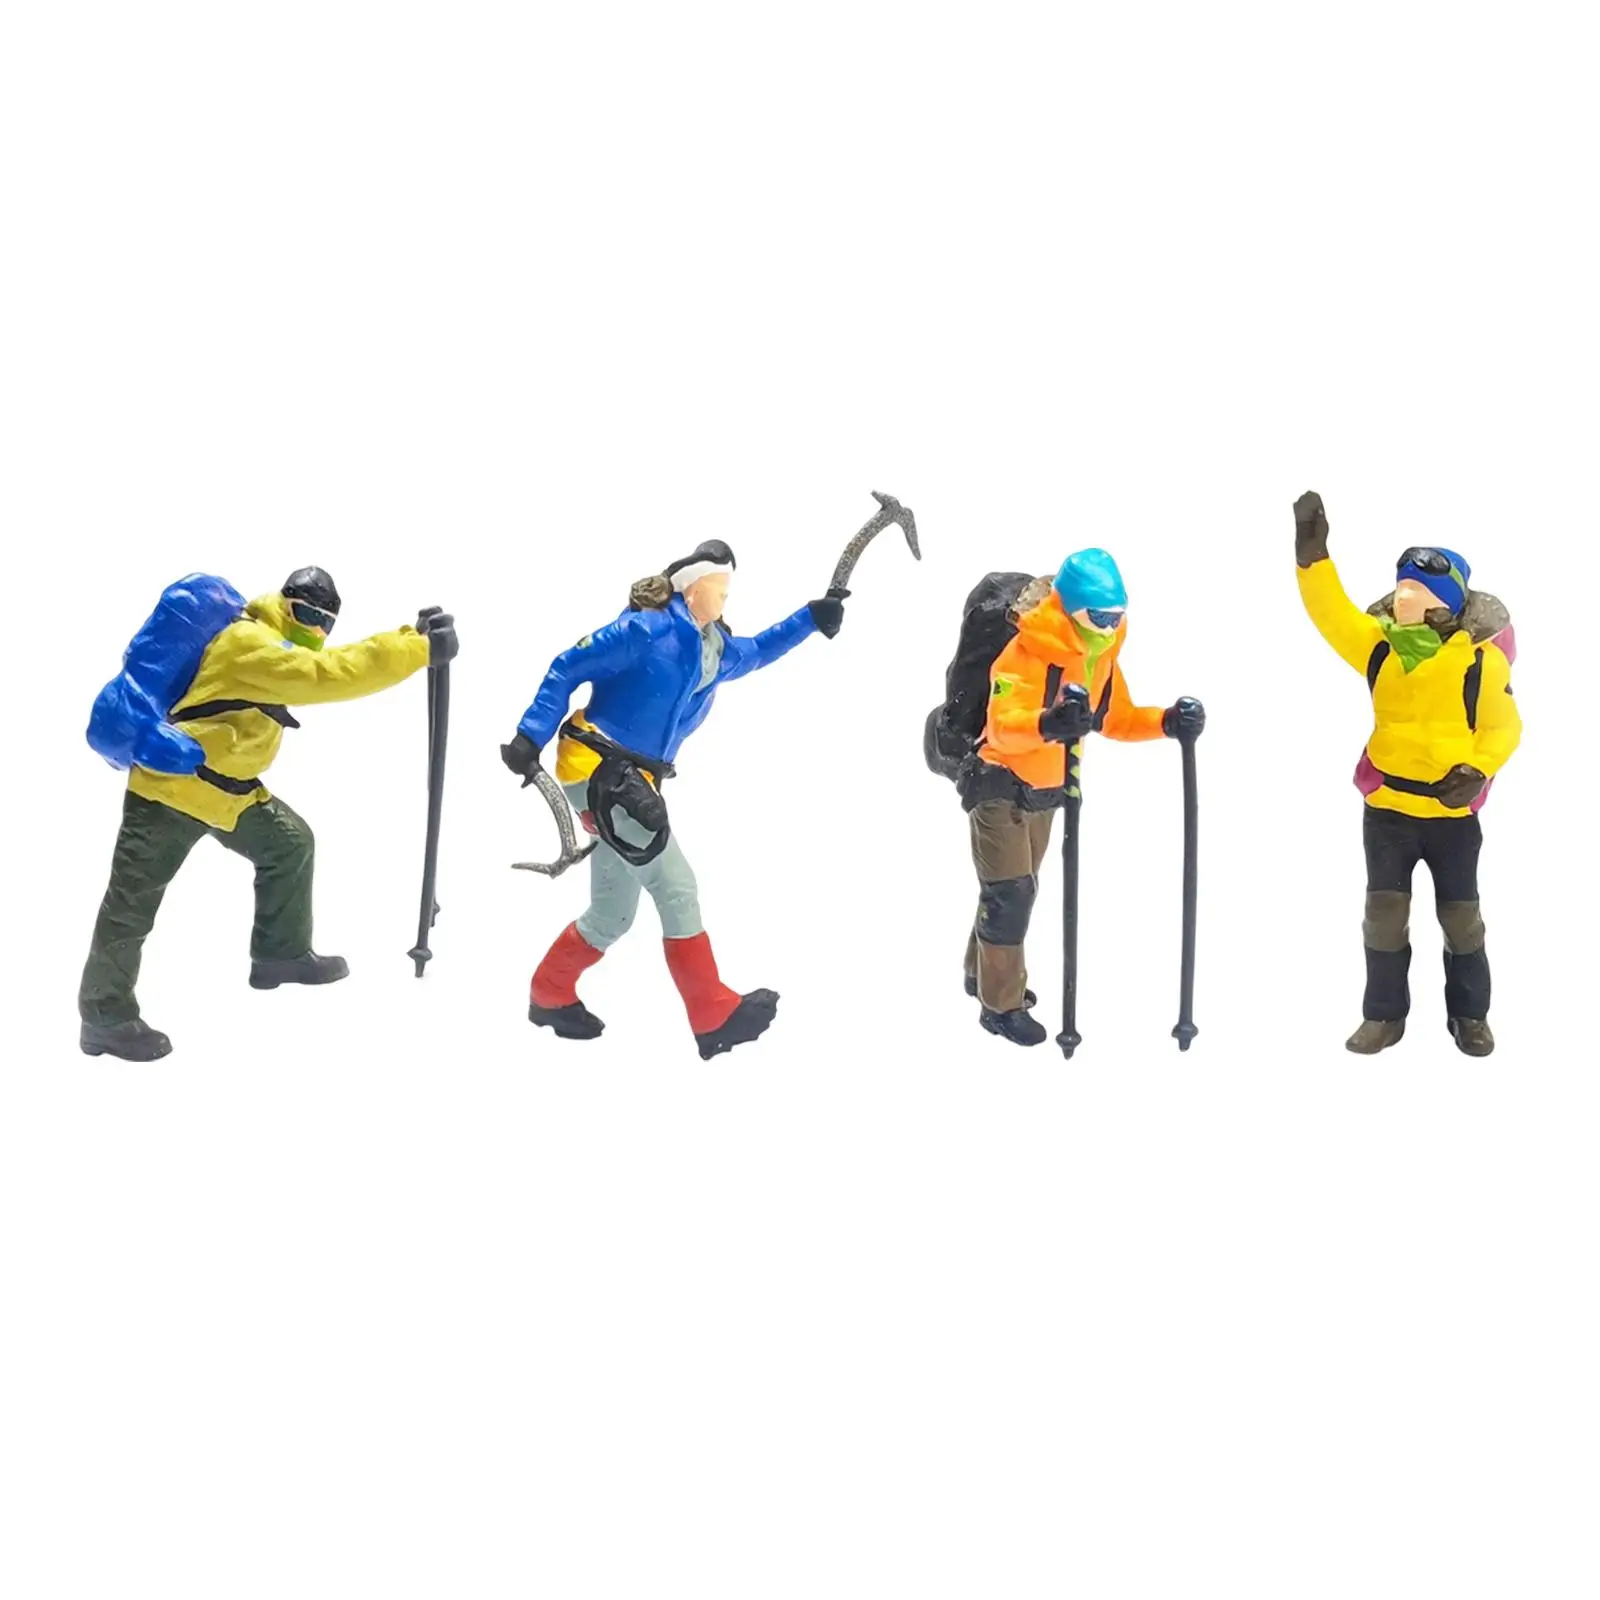 Realistic 1/87 Climbing People Figurines Miniature People Model Ornament for DIY Projects Sand Table Dollhouse Layout Decoration